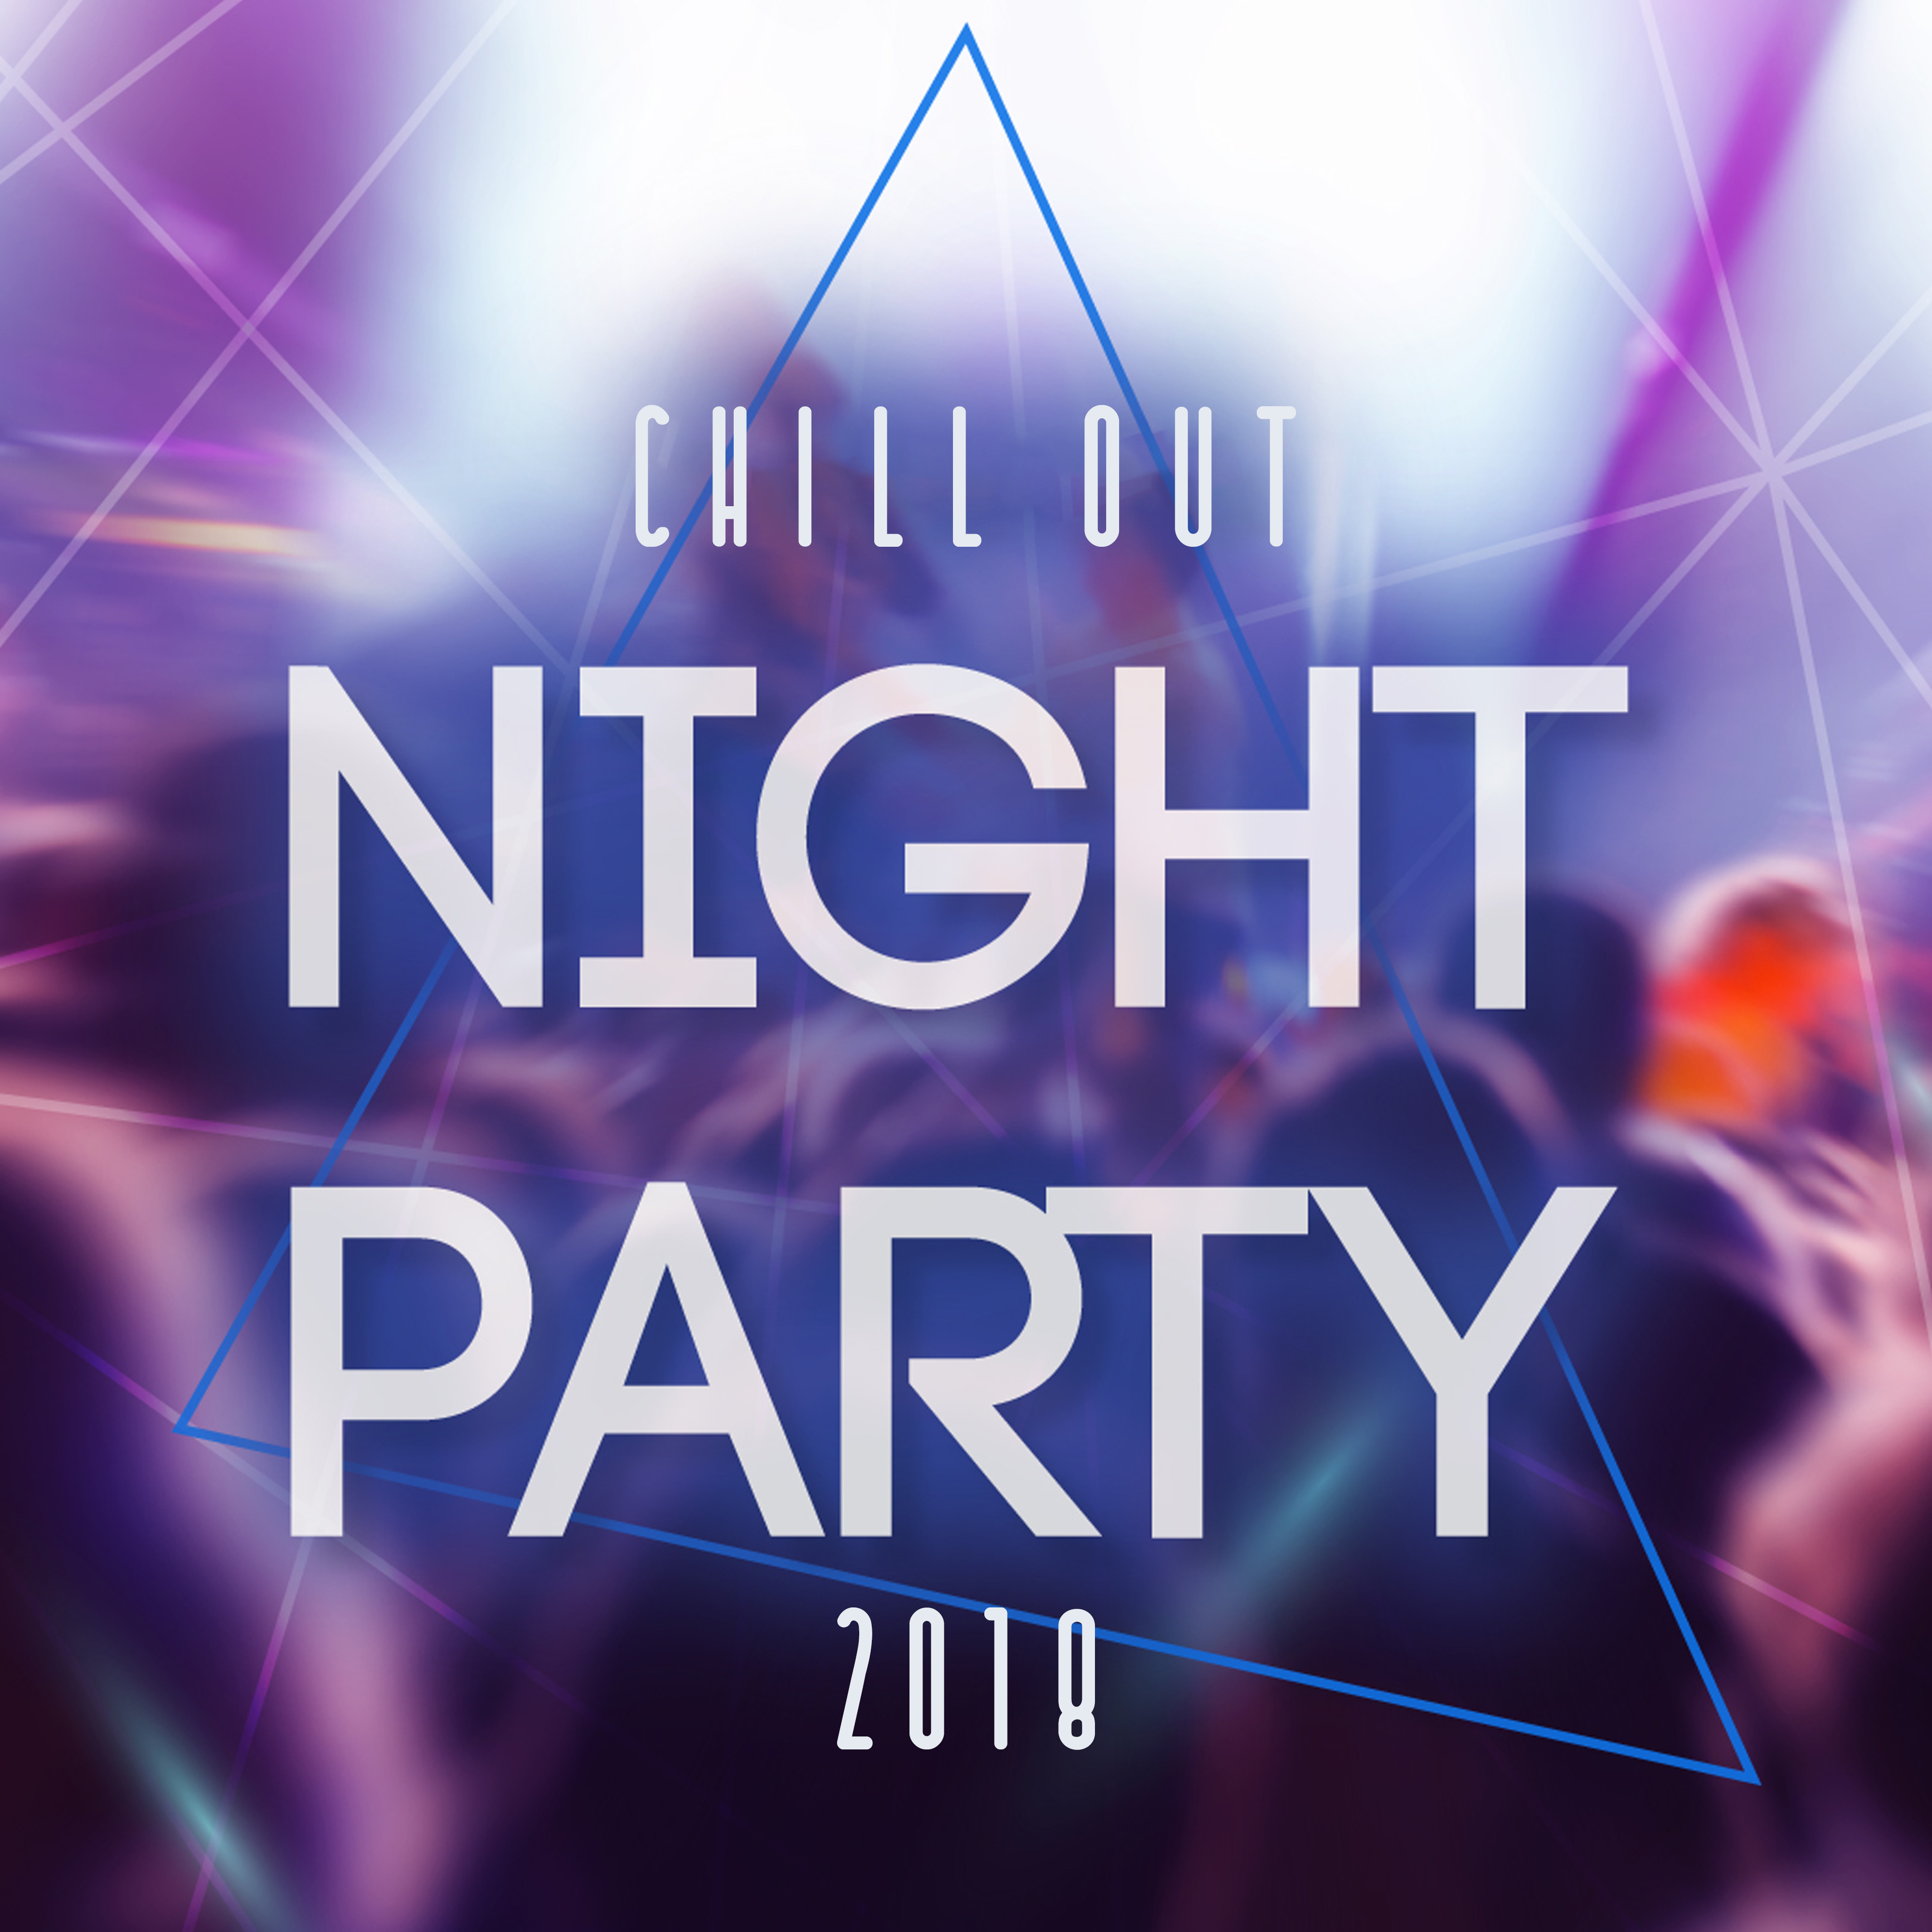 Chill Out Night Party 2018